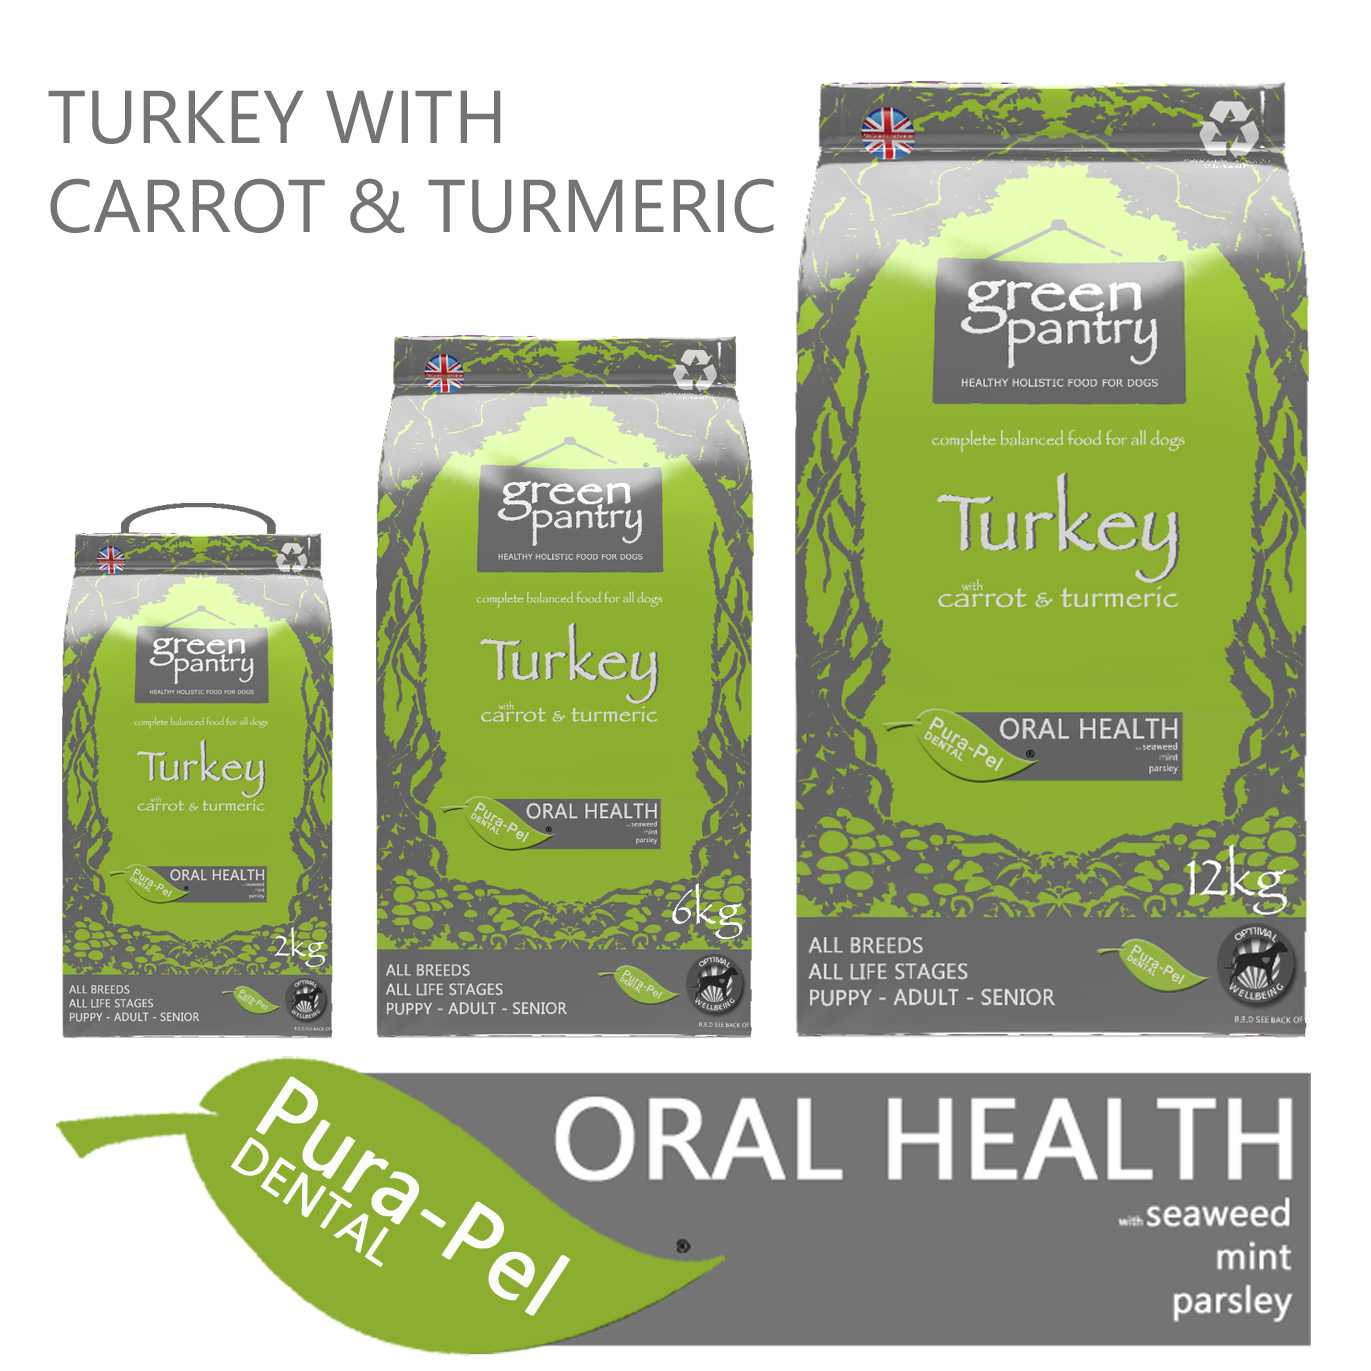 Green Pantry Turkey with Carrot & Turmeric dry dog food